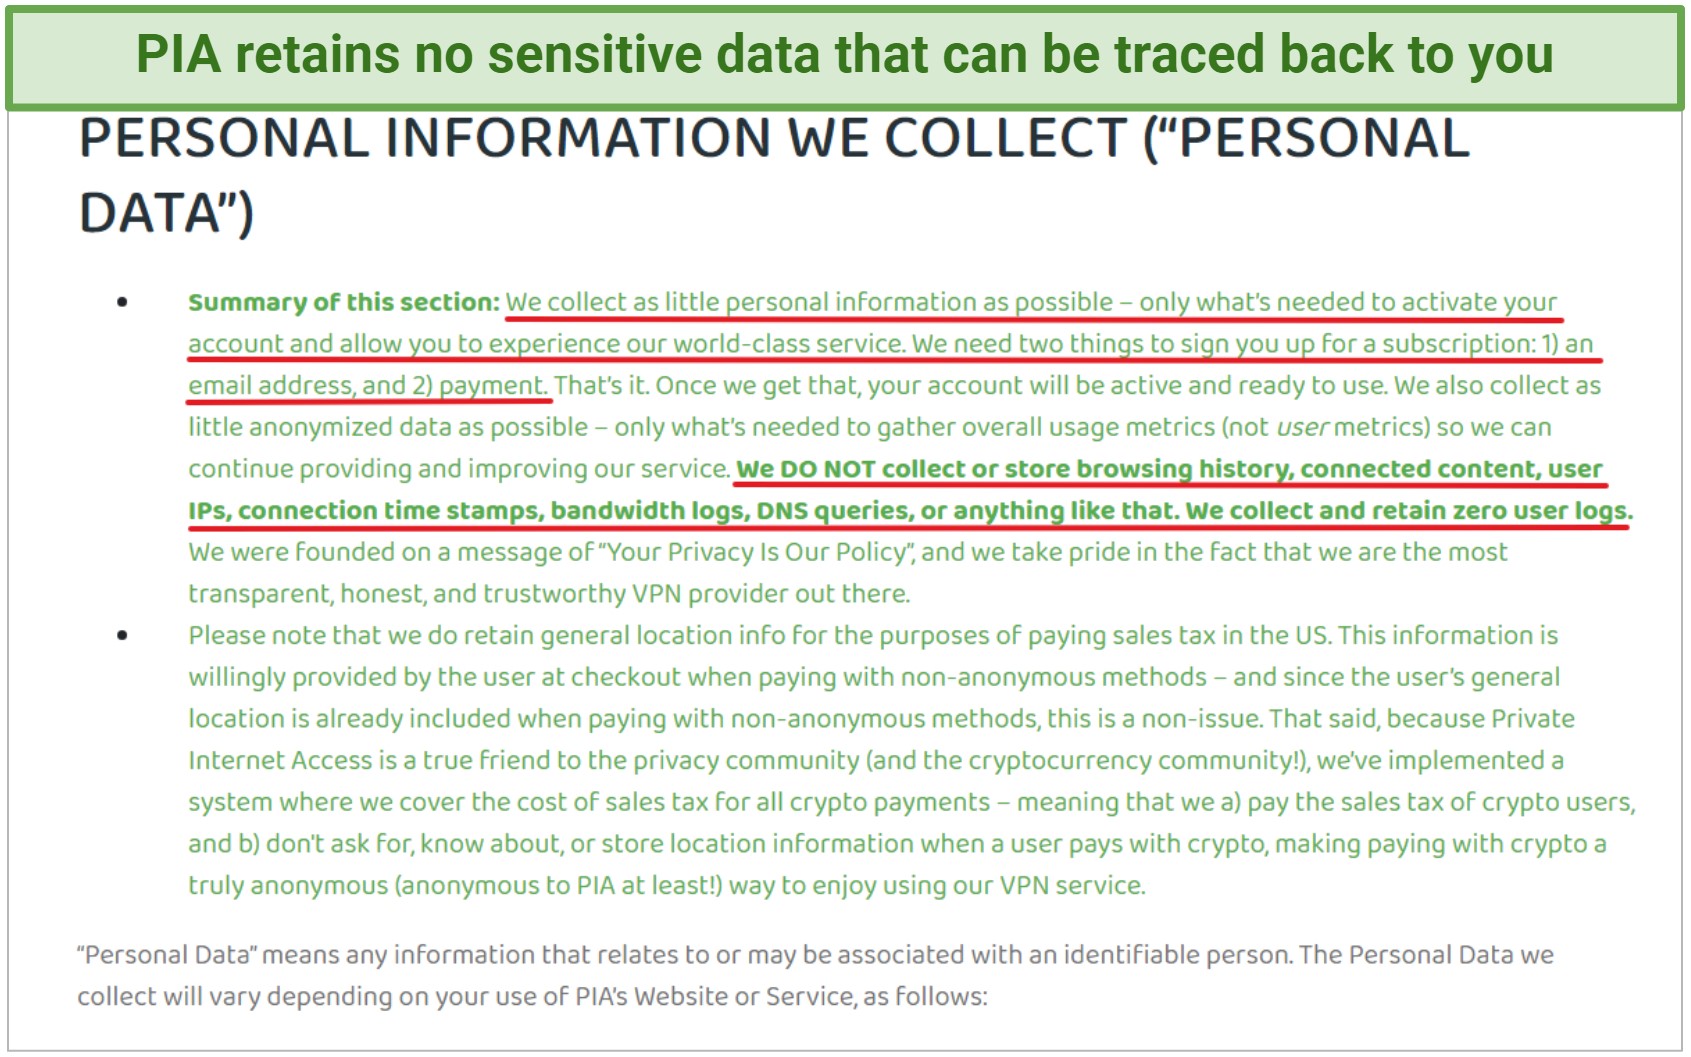 Screenshot of PIA's privacy policy claiming it collects zero logs